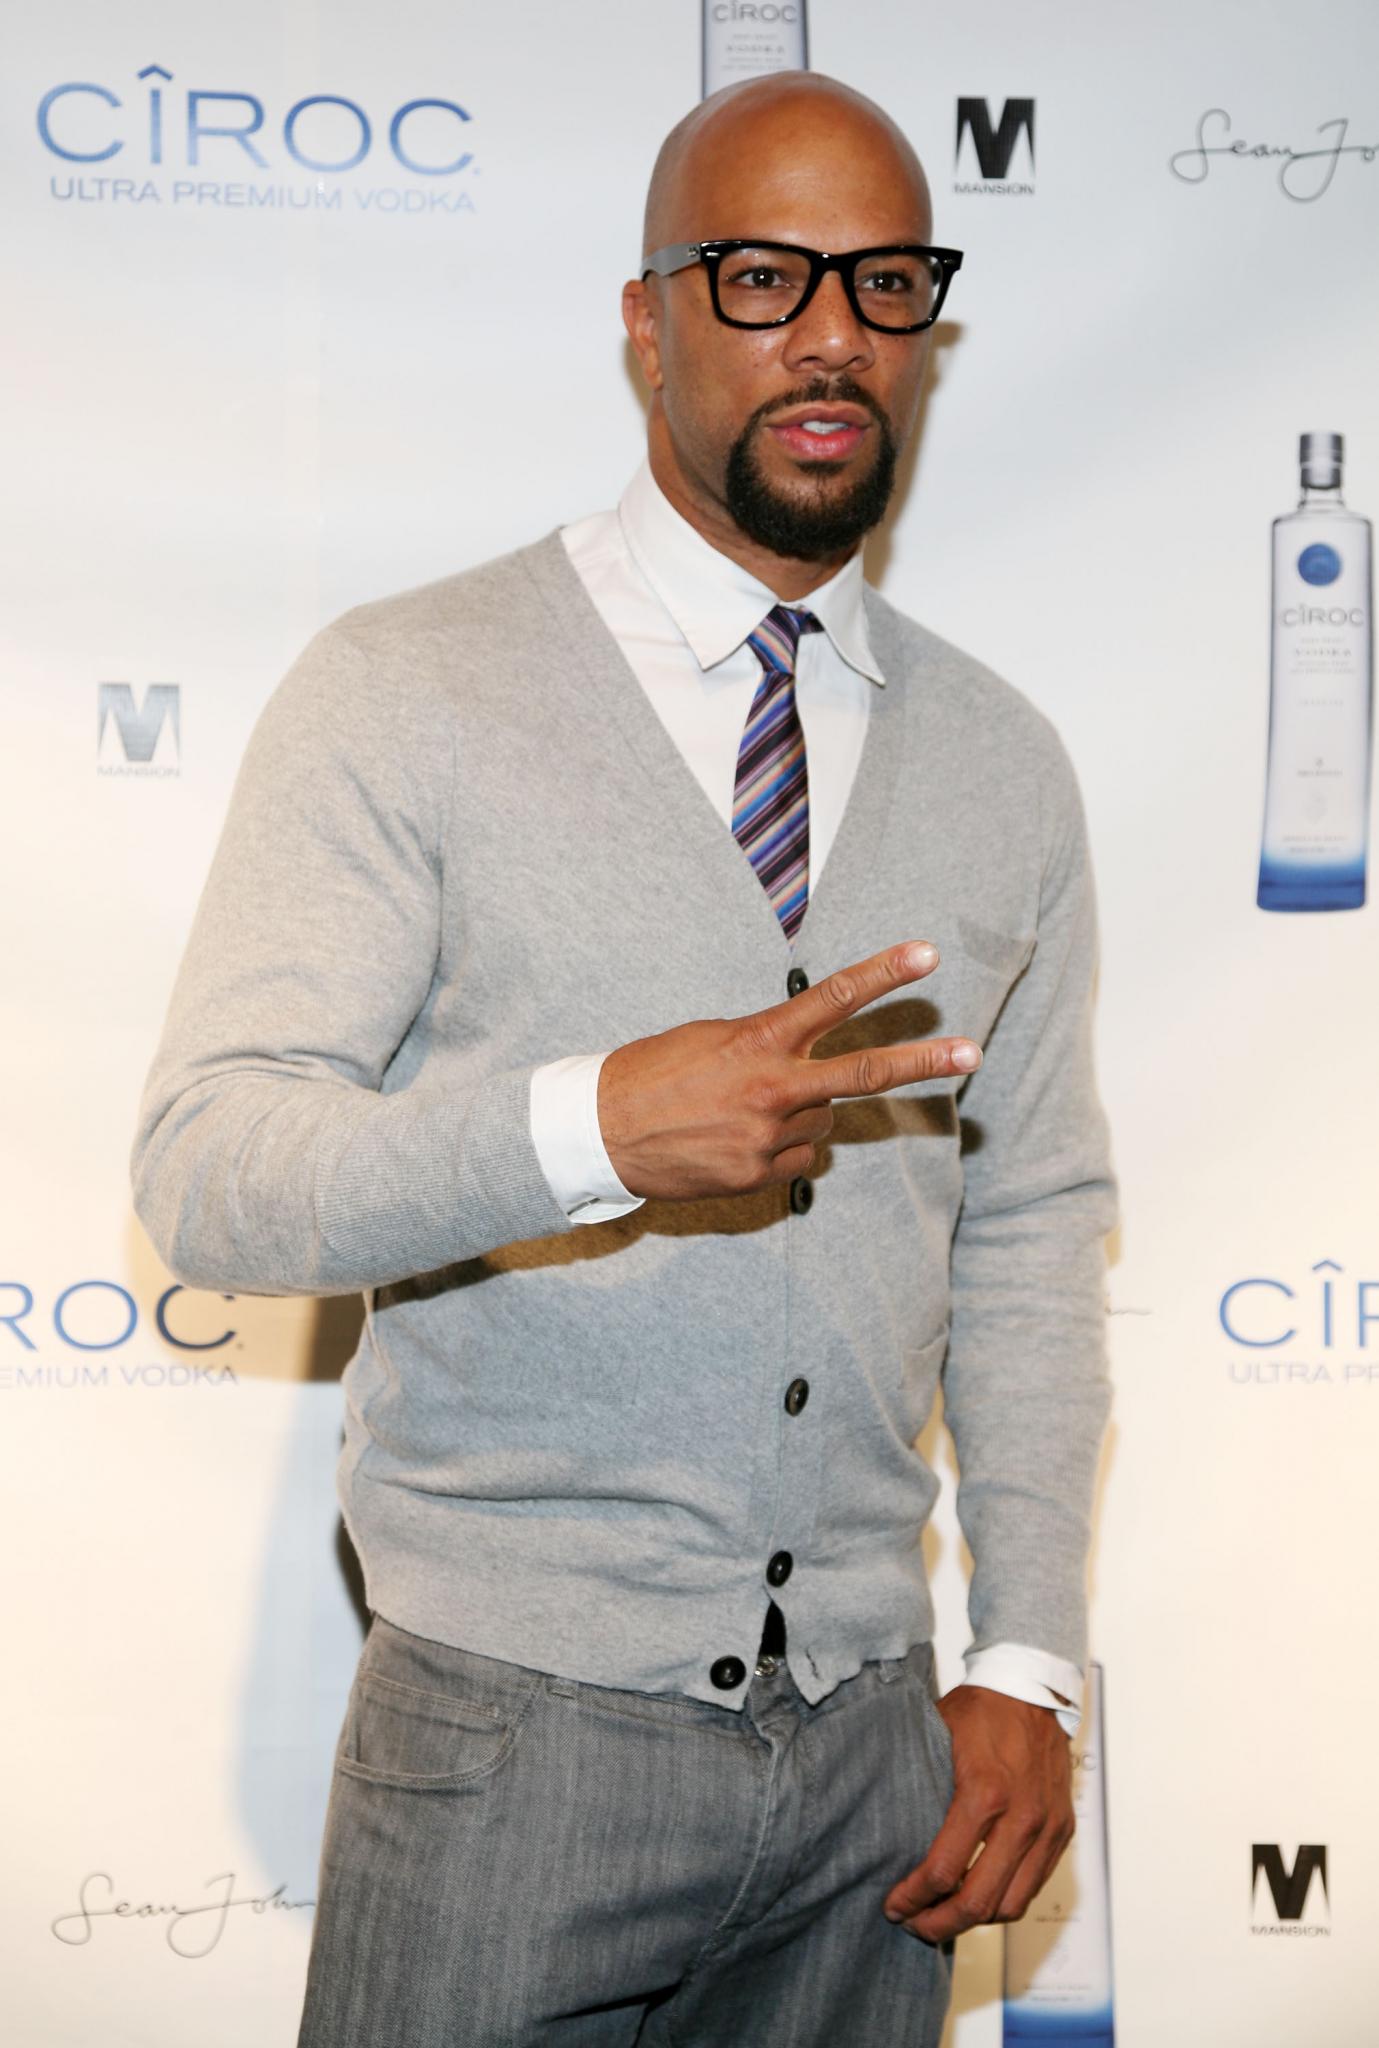 Common's Commencement Speech Canceled After Police Complaints
